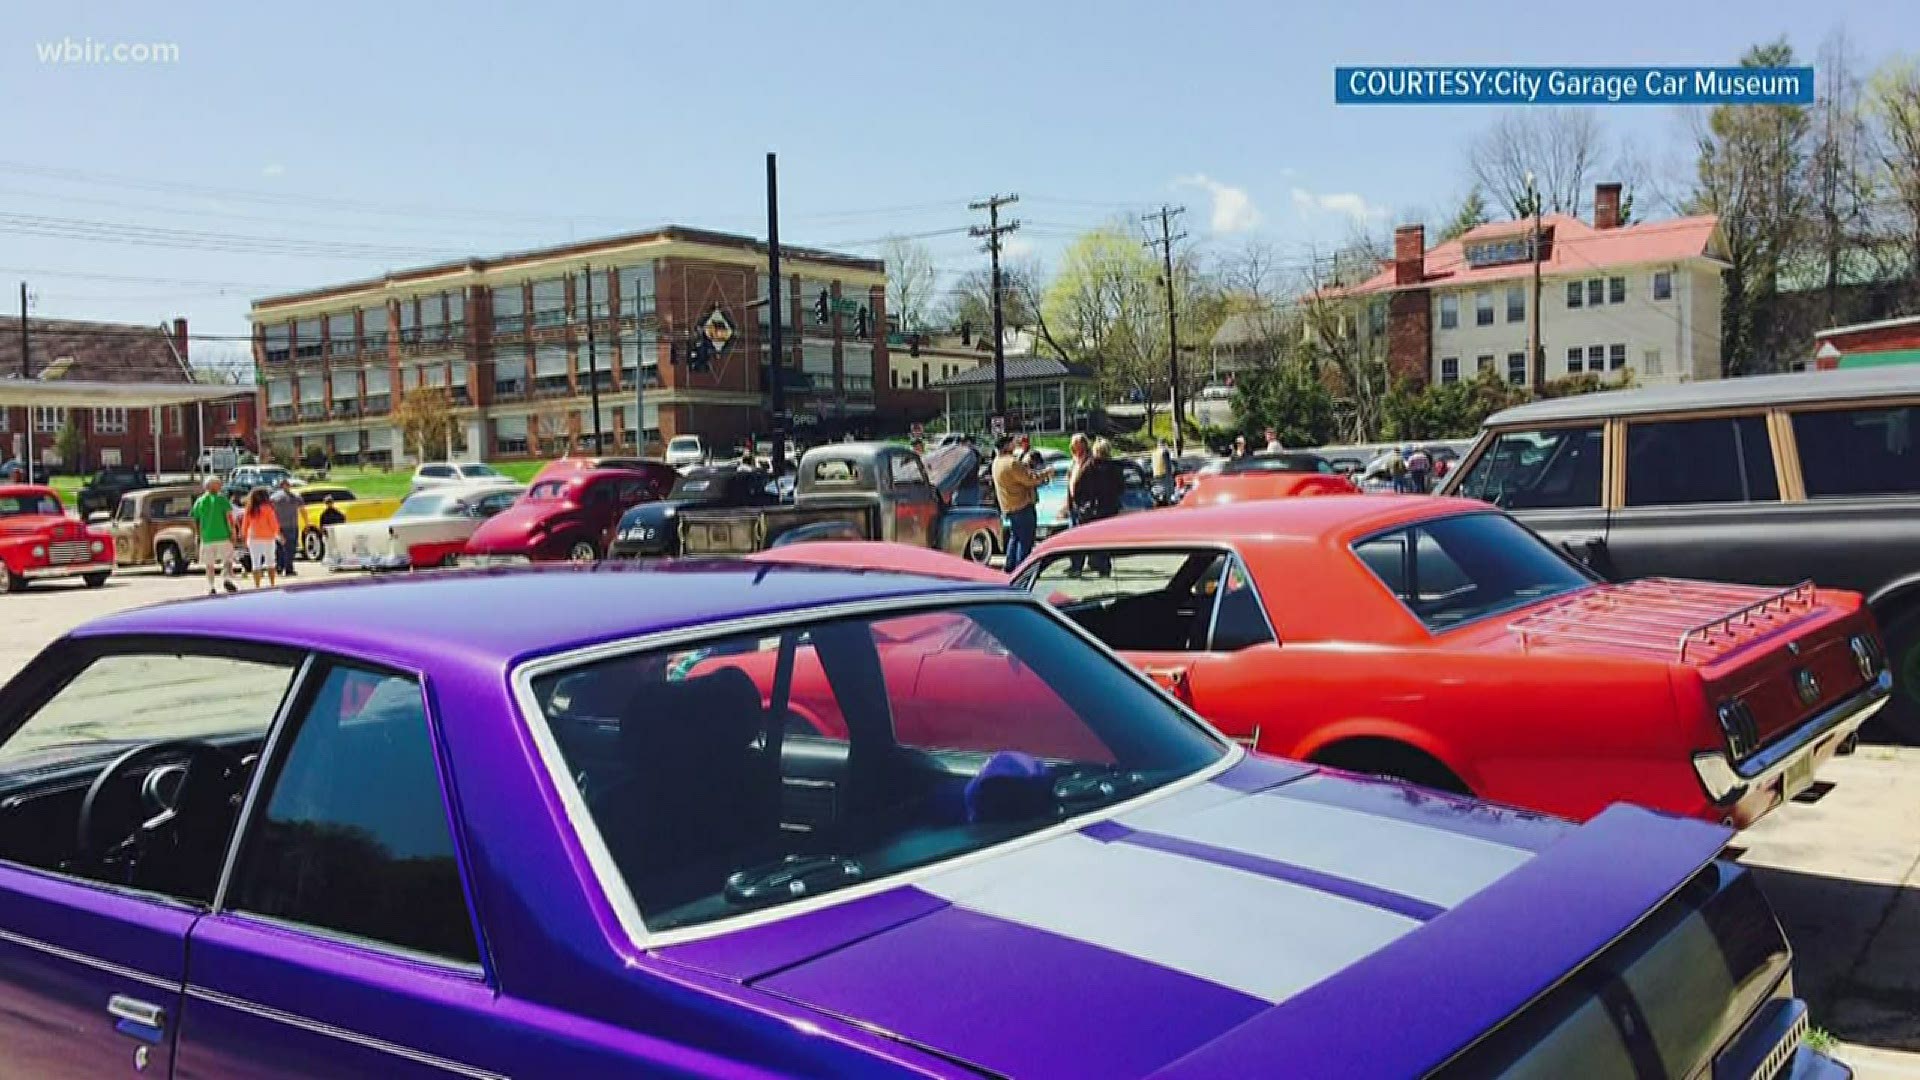 City Garage Car Museum is changing things up for its annual car show.